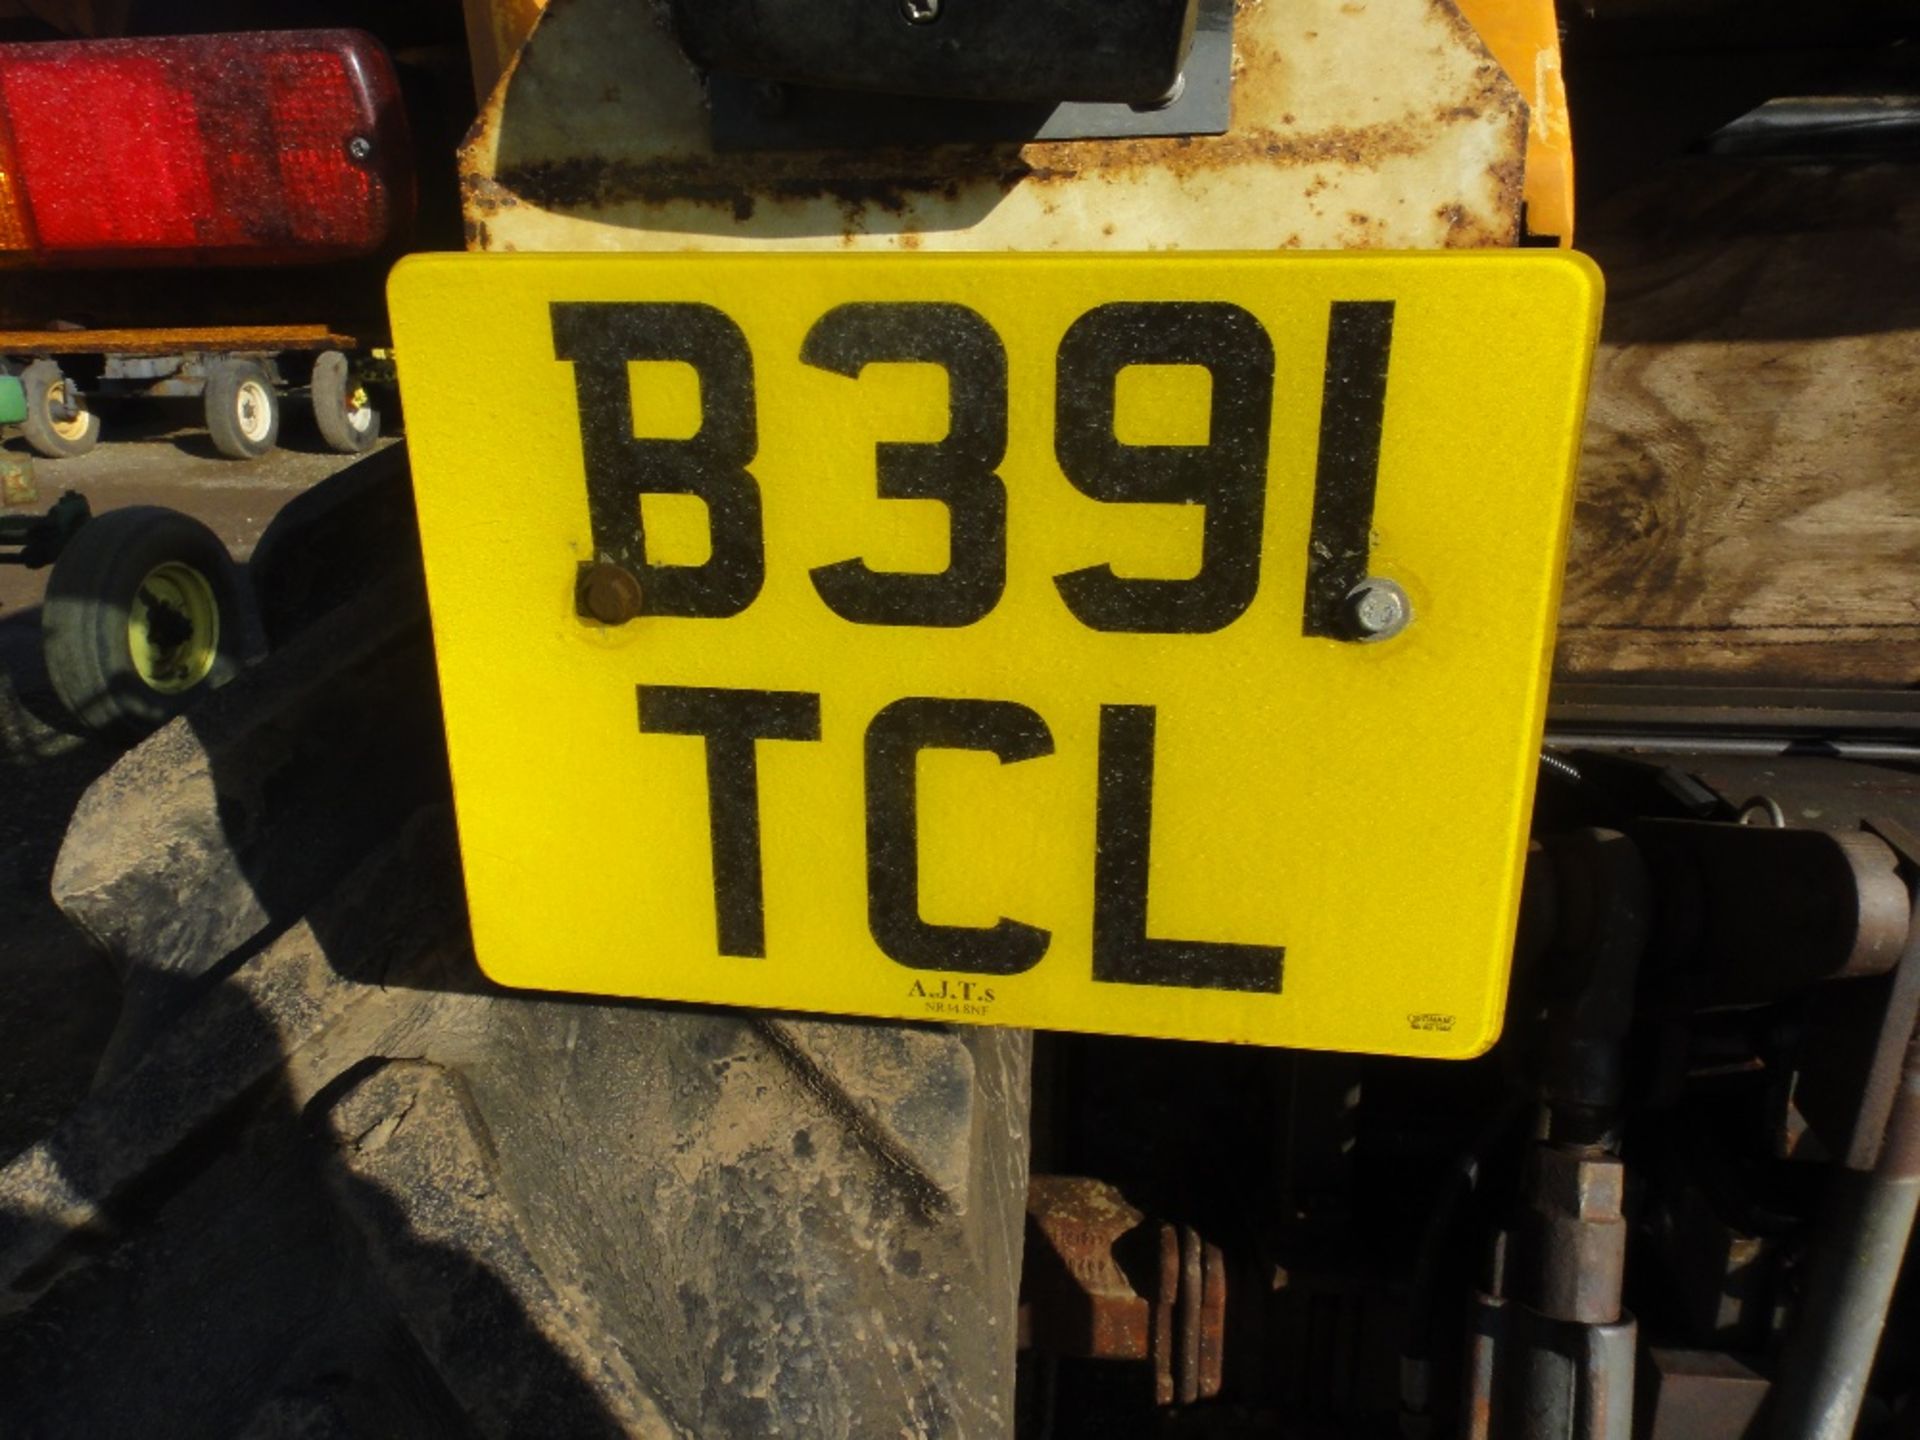 Renault TS75-14 4wd Tractor Reg No. B391 TCL - Image 8 of 13